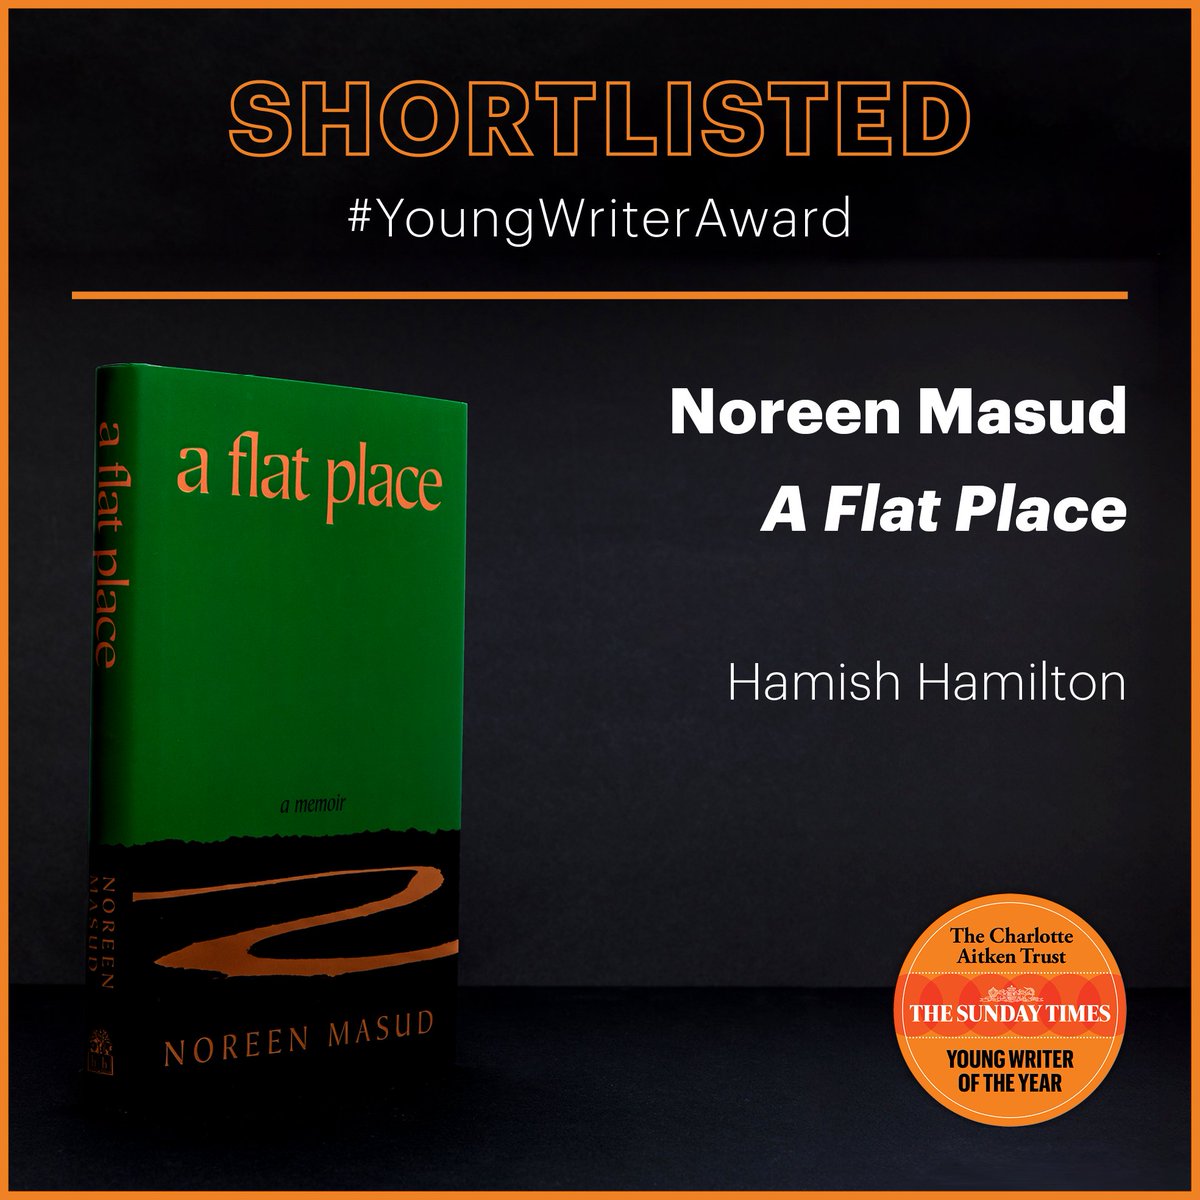 We are absolutely thrilled that not one, but TWO titles by our sister imprint @HamishH1931 have been shortlisted for the #YoungWriterAward! 

Huge congrats to @michaelmagee__ , @NoreenMasud and all shortlisted authors! 🎉🎉